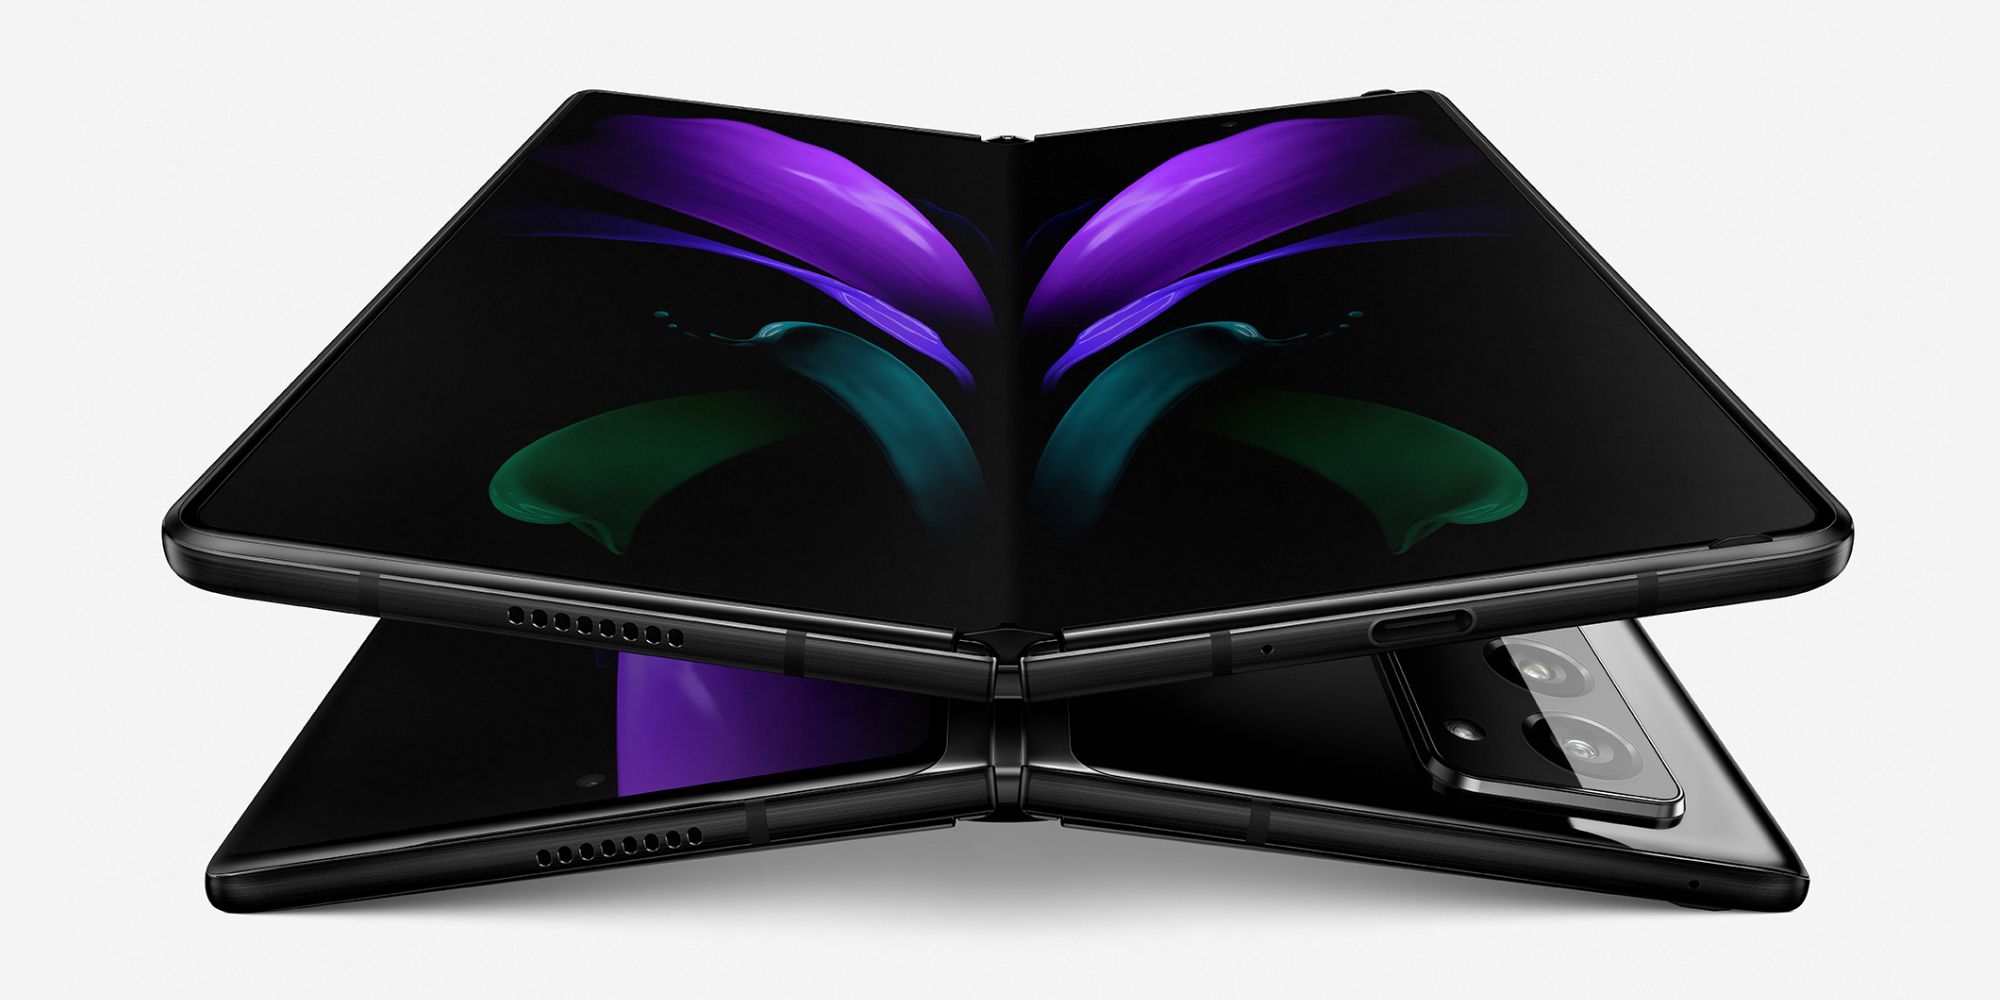 Official render of Samsung Galaxy Z Fold 2 in black